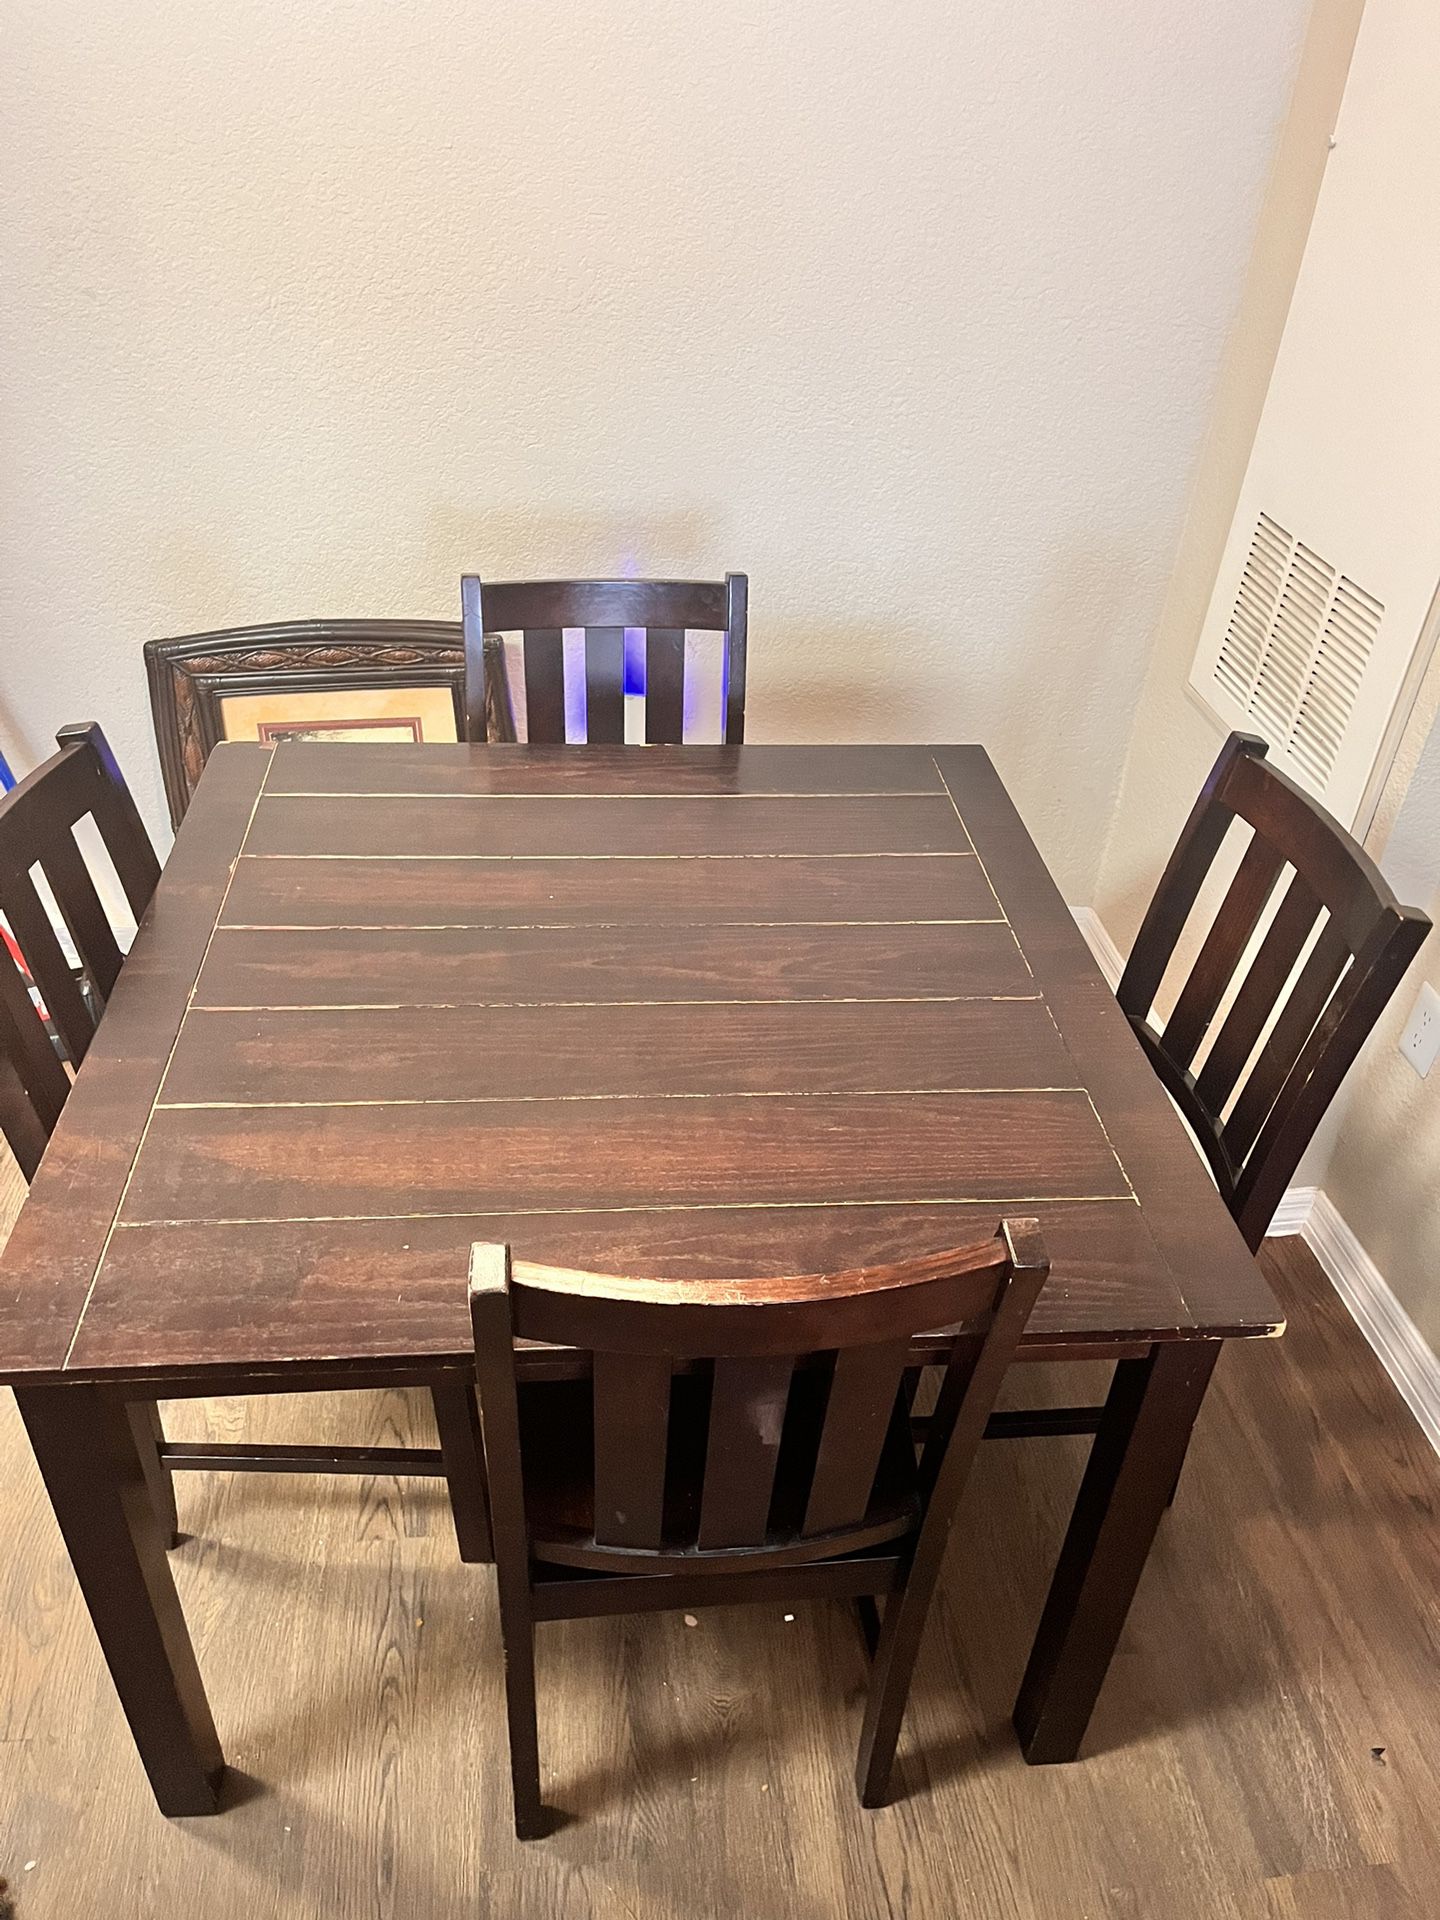 Wood Table (4 Chairs) Buy Today !! Move Out Sale !! 5/19